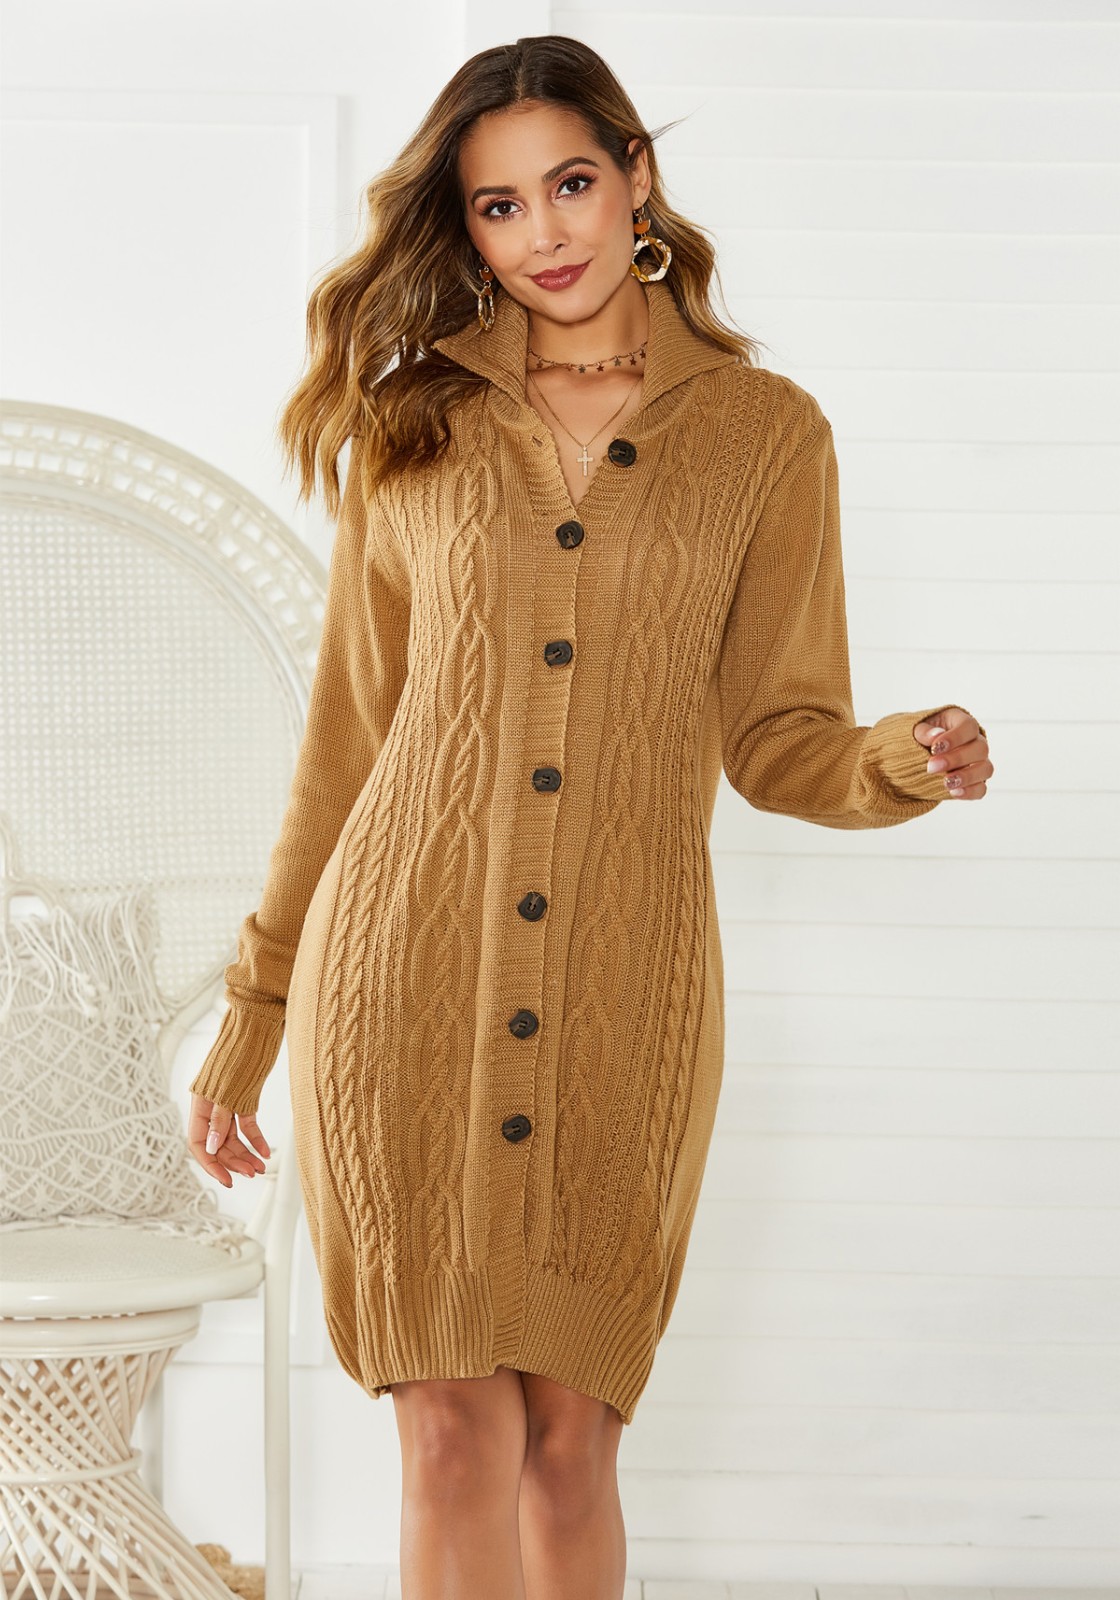 Cardigan Sweater from Ladies Winter Collection – Winter Suit Ladies.jpg